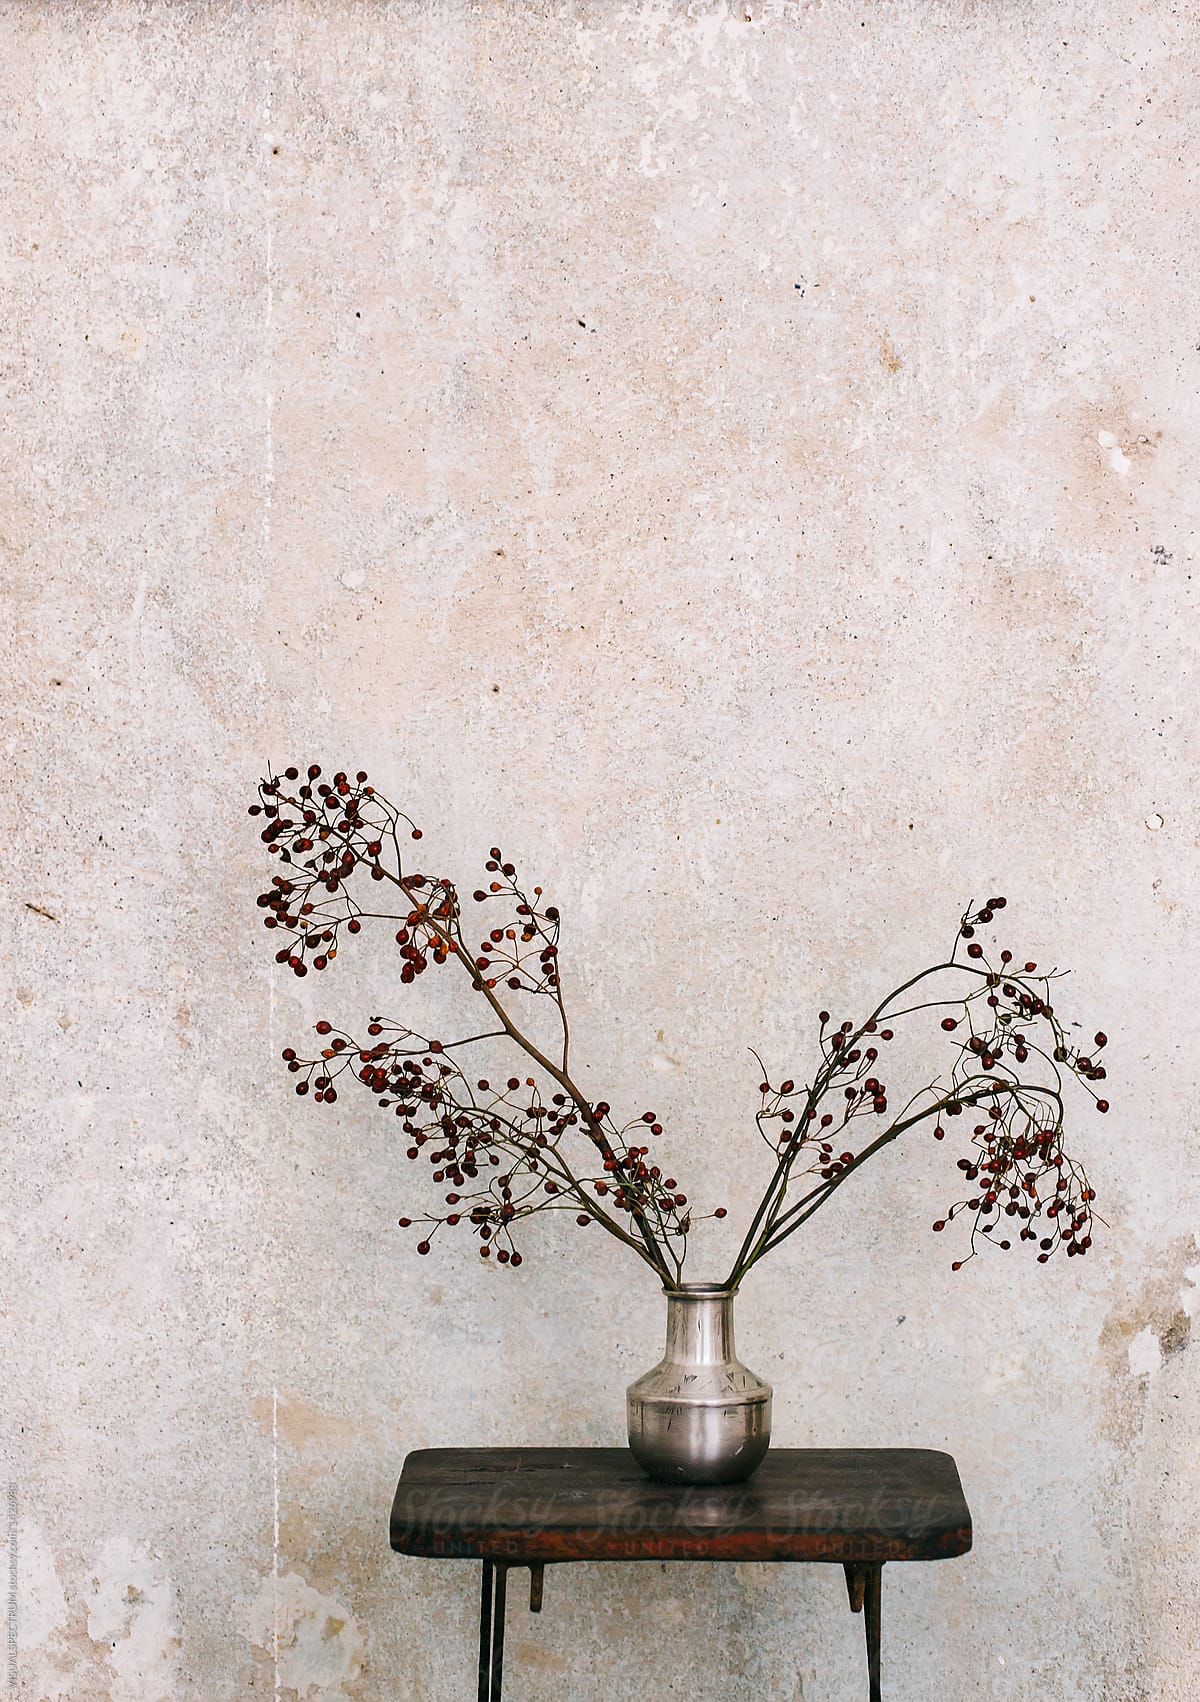 Home Decoration - Japanese Flower Arrangement in Front of Shabby Wall